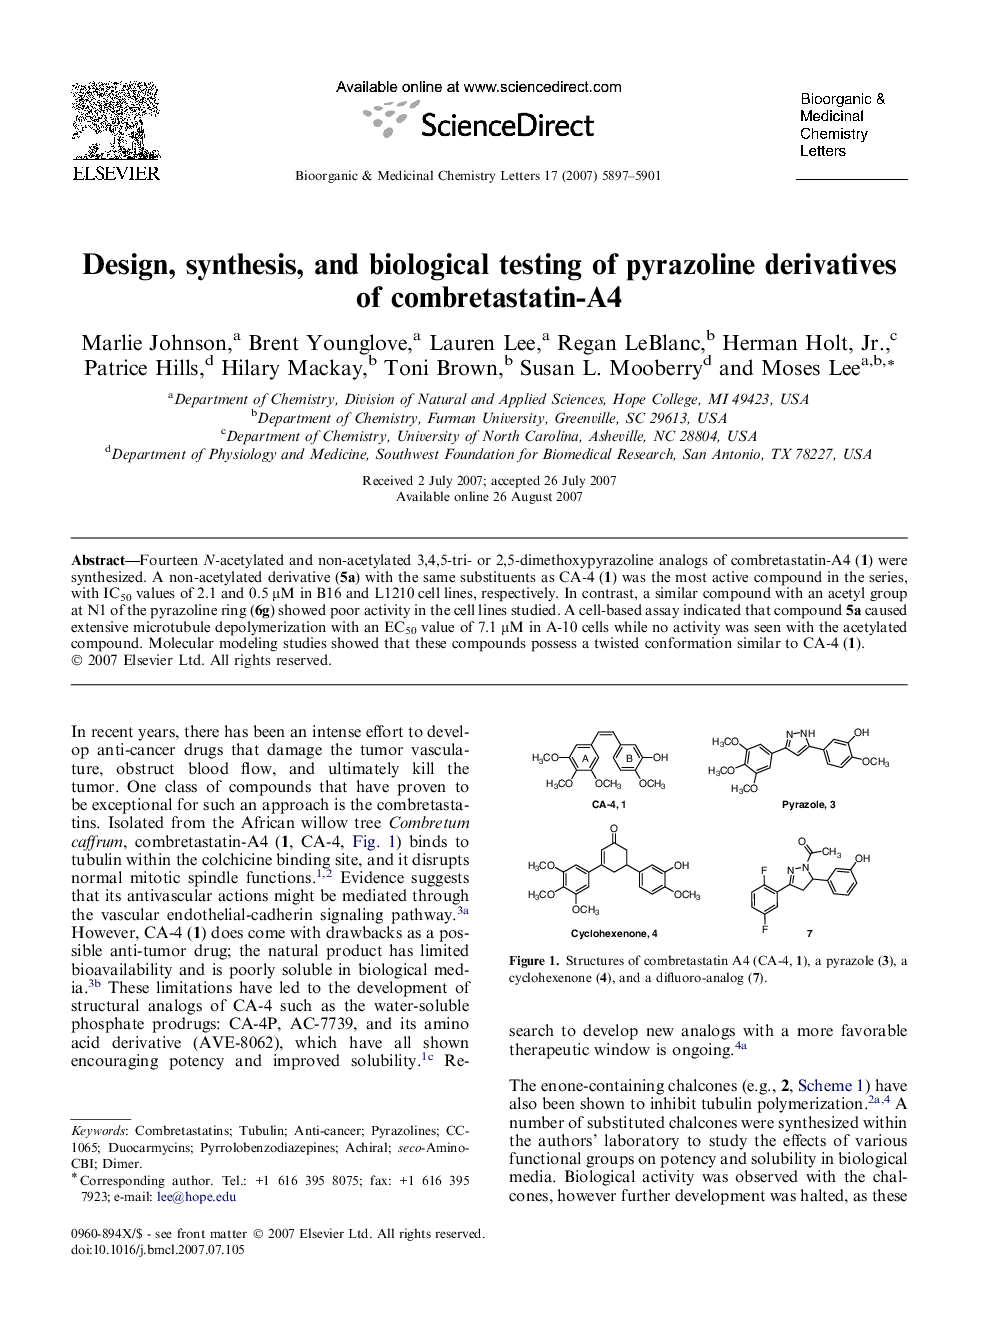 Design, synthesis, and biological testing of pyrazoline derivatives of combretastatin-A4